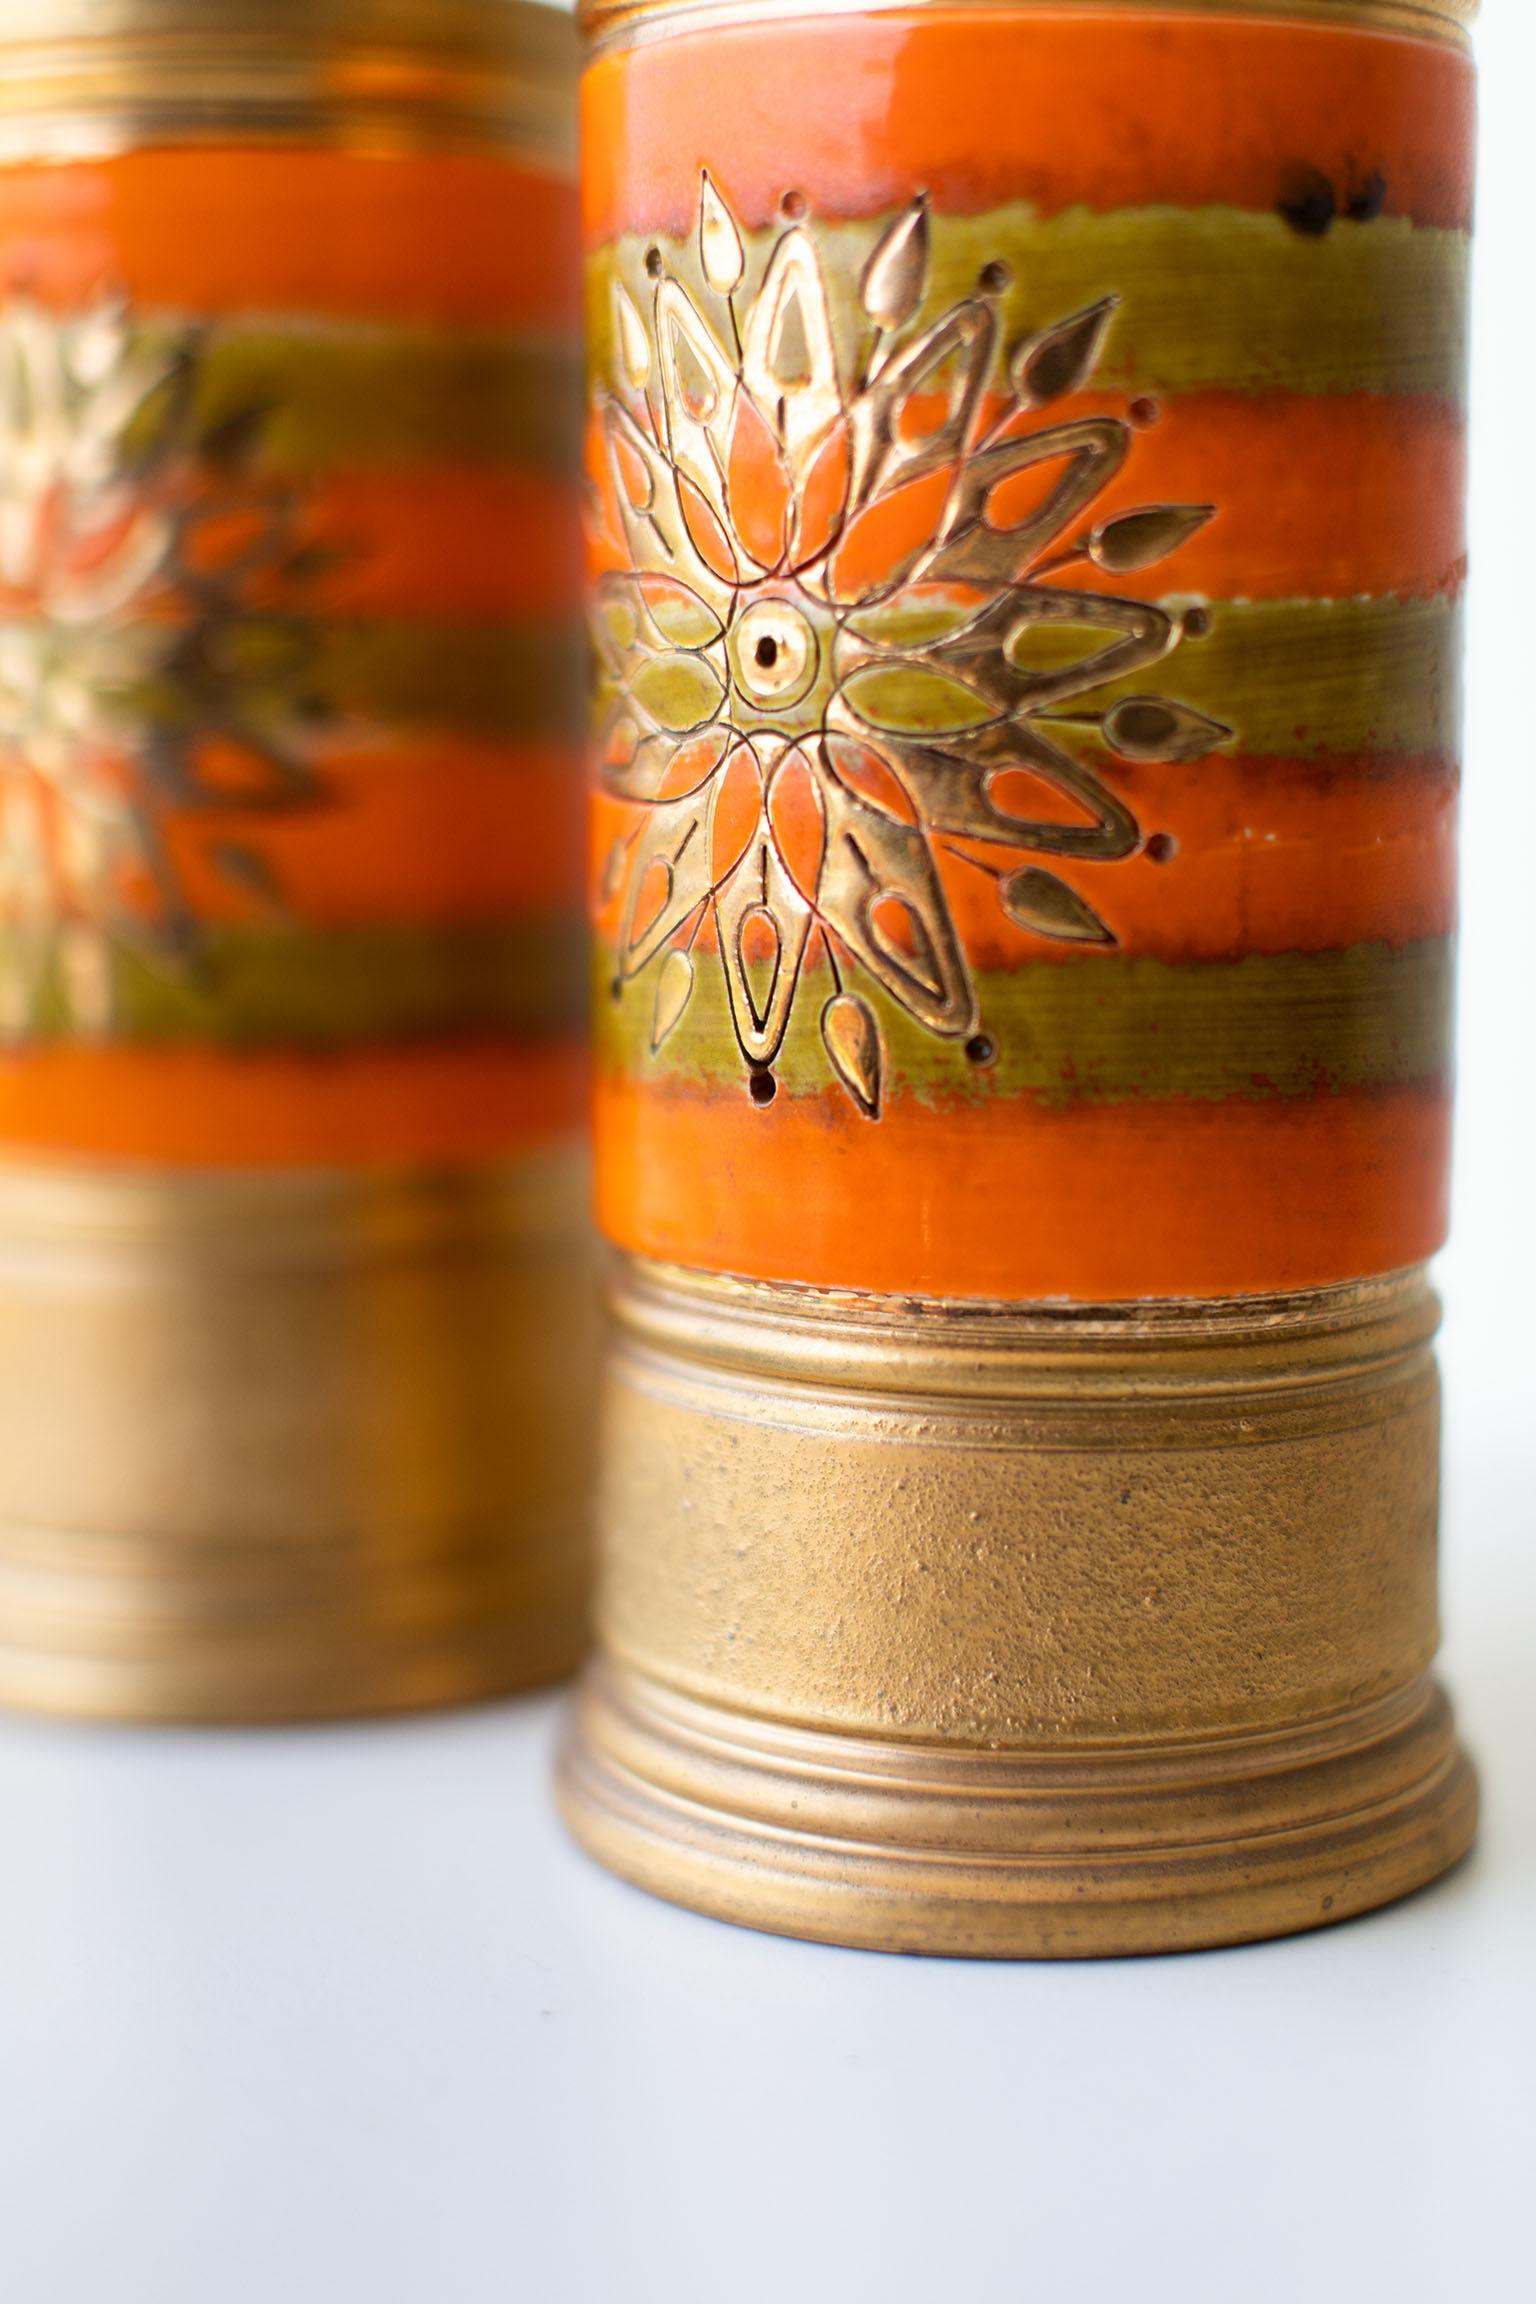 Manufacturer: Bitossi

Importer: Rosenthal Netter
Period or model: Mid-Century Modern. 
Specs: Pottery

Condition: 

These Bitossi orange and gold vases for Rosenthal Netter are in good condition. There are a couple imperfections in the